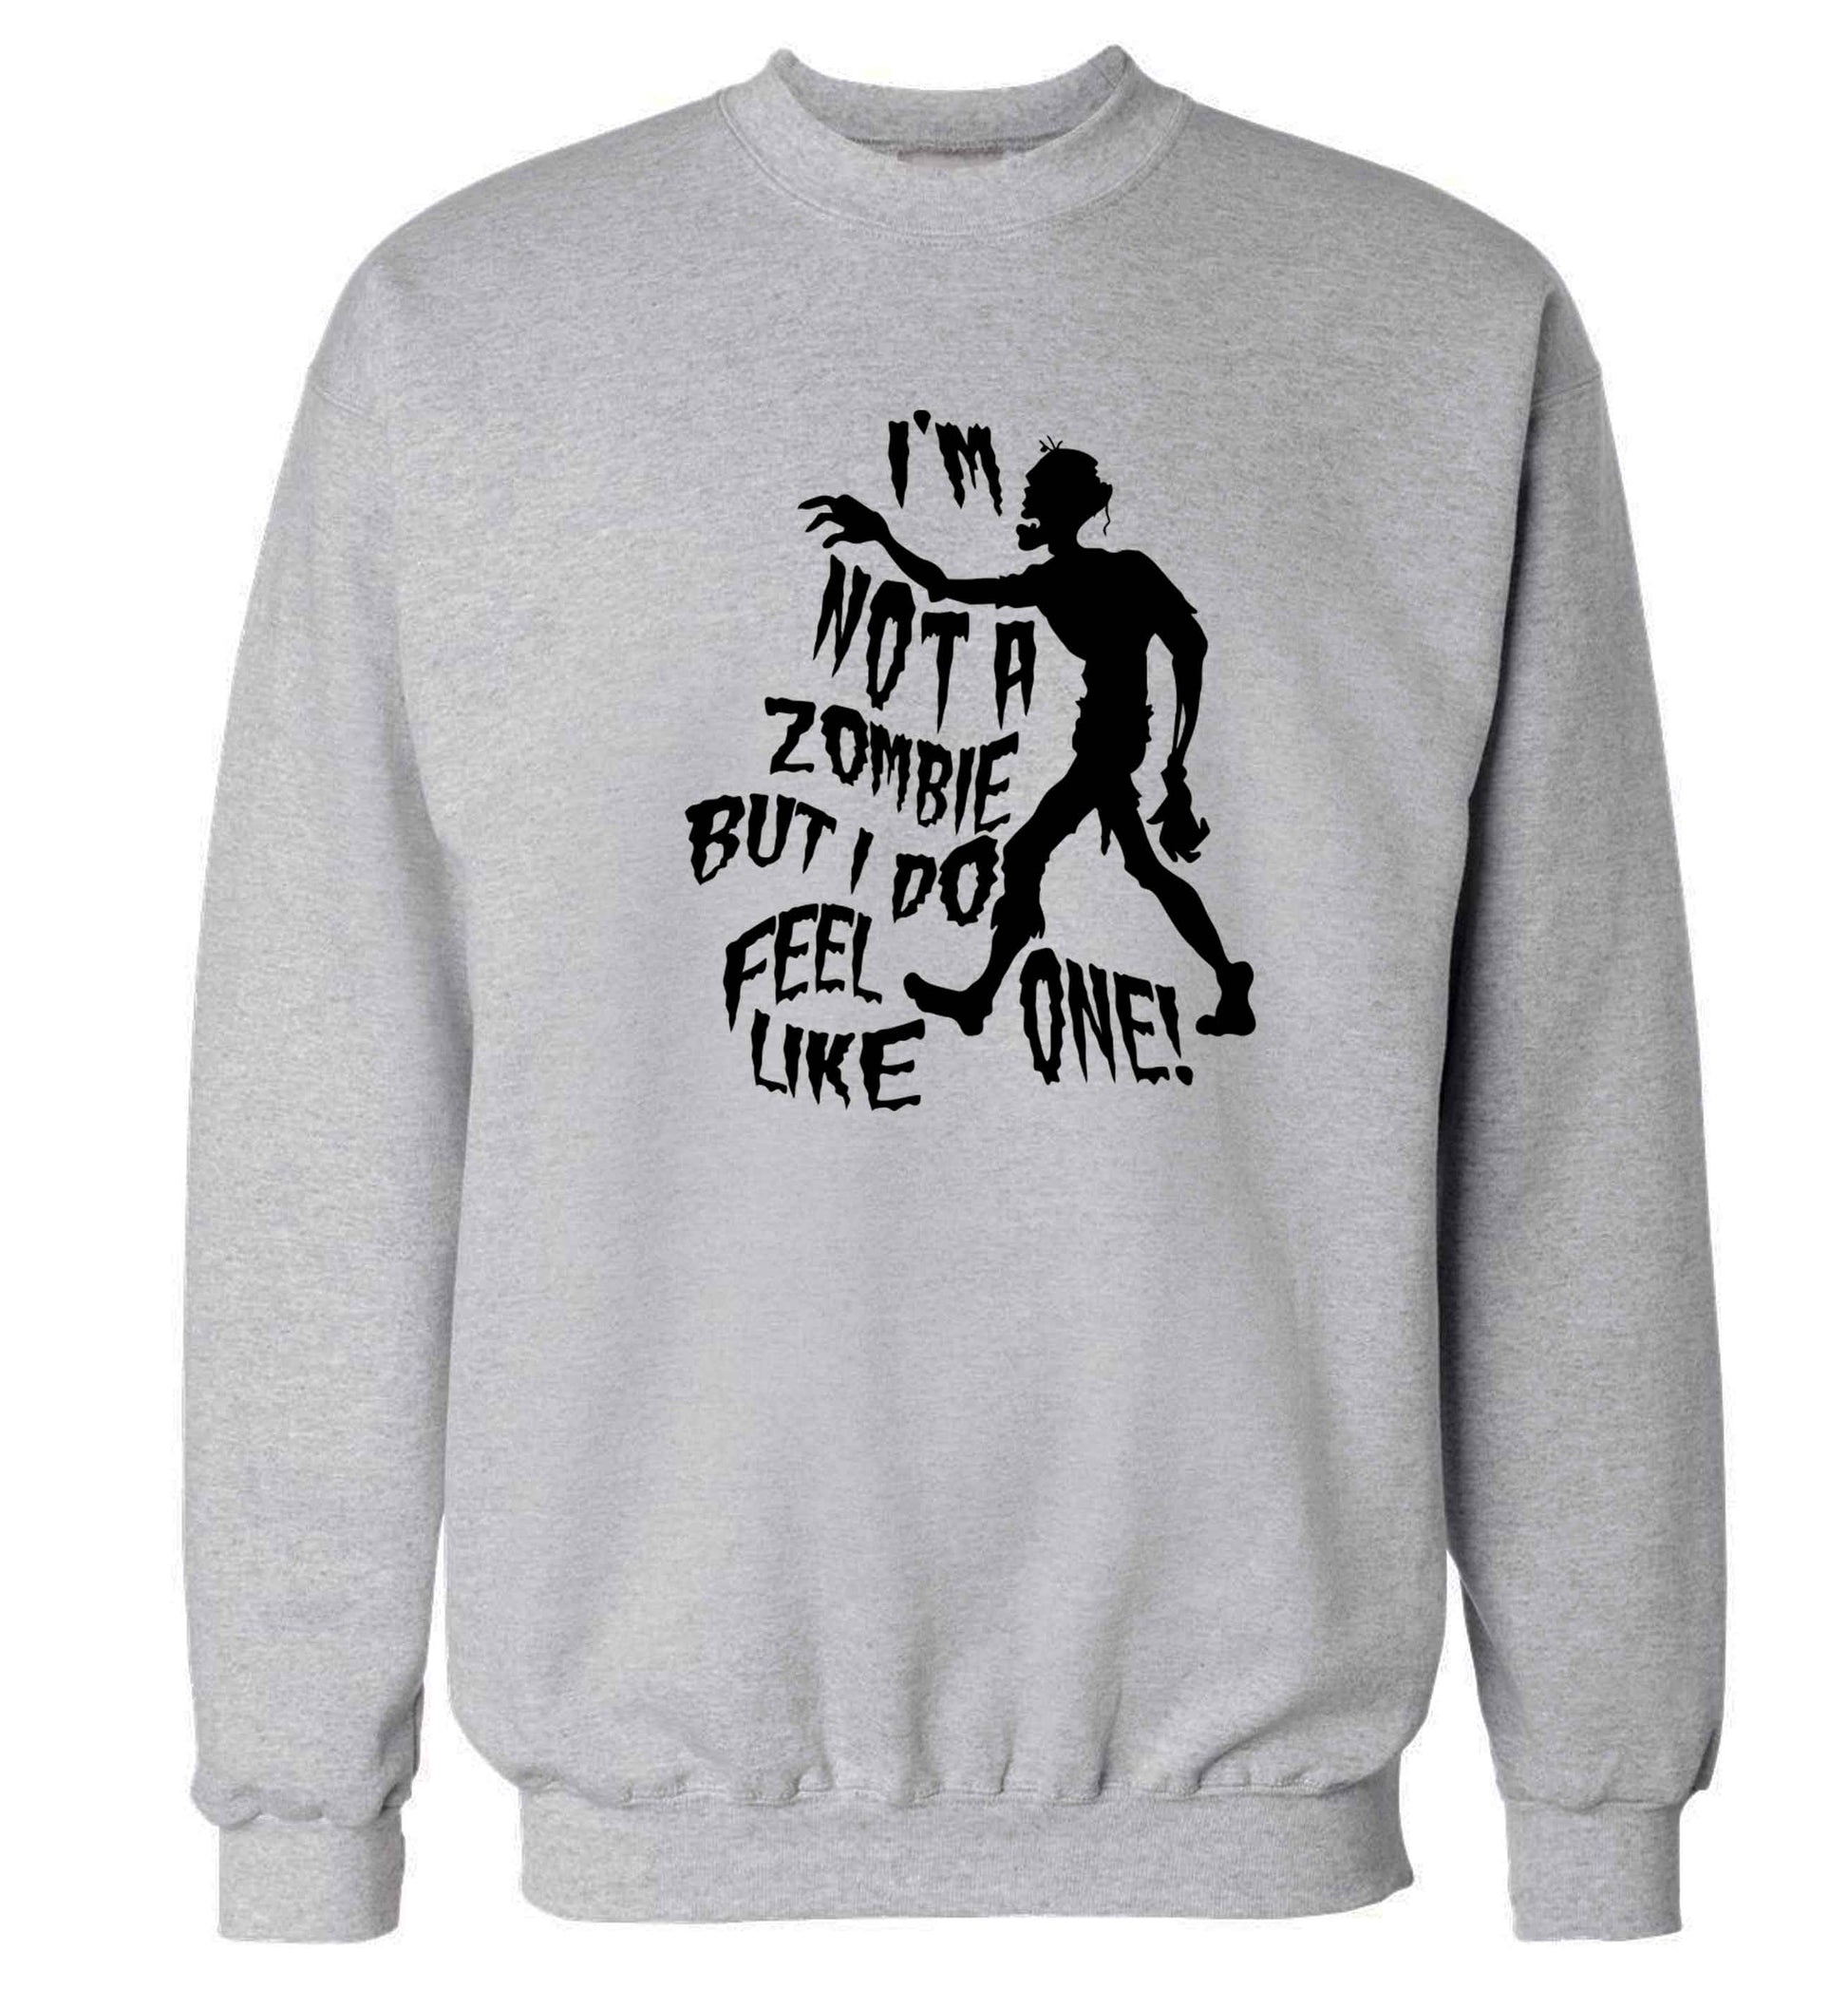 I'm not a zombie but I do feel like one! Adult's unisex grey Sweater 2XL